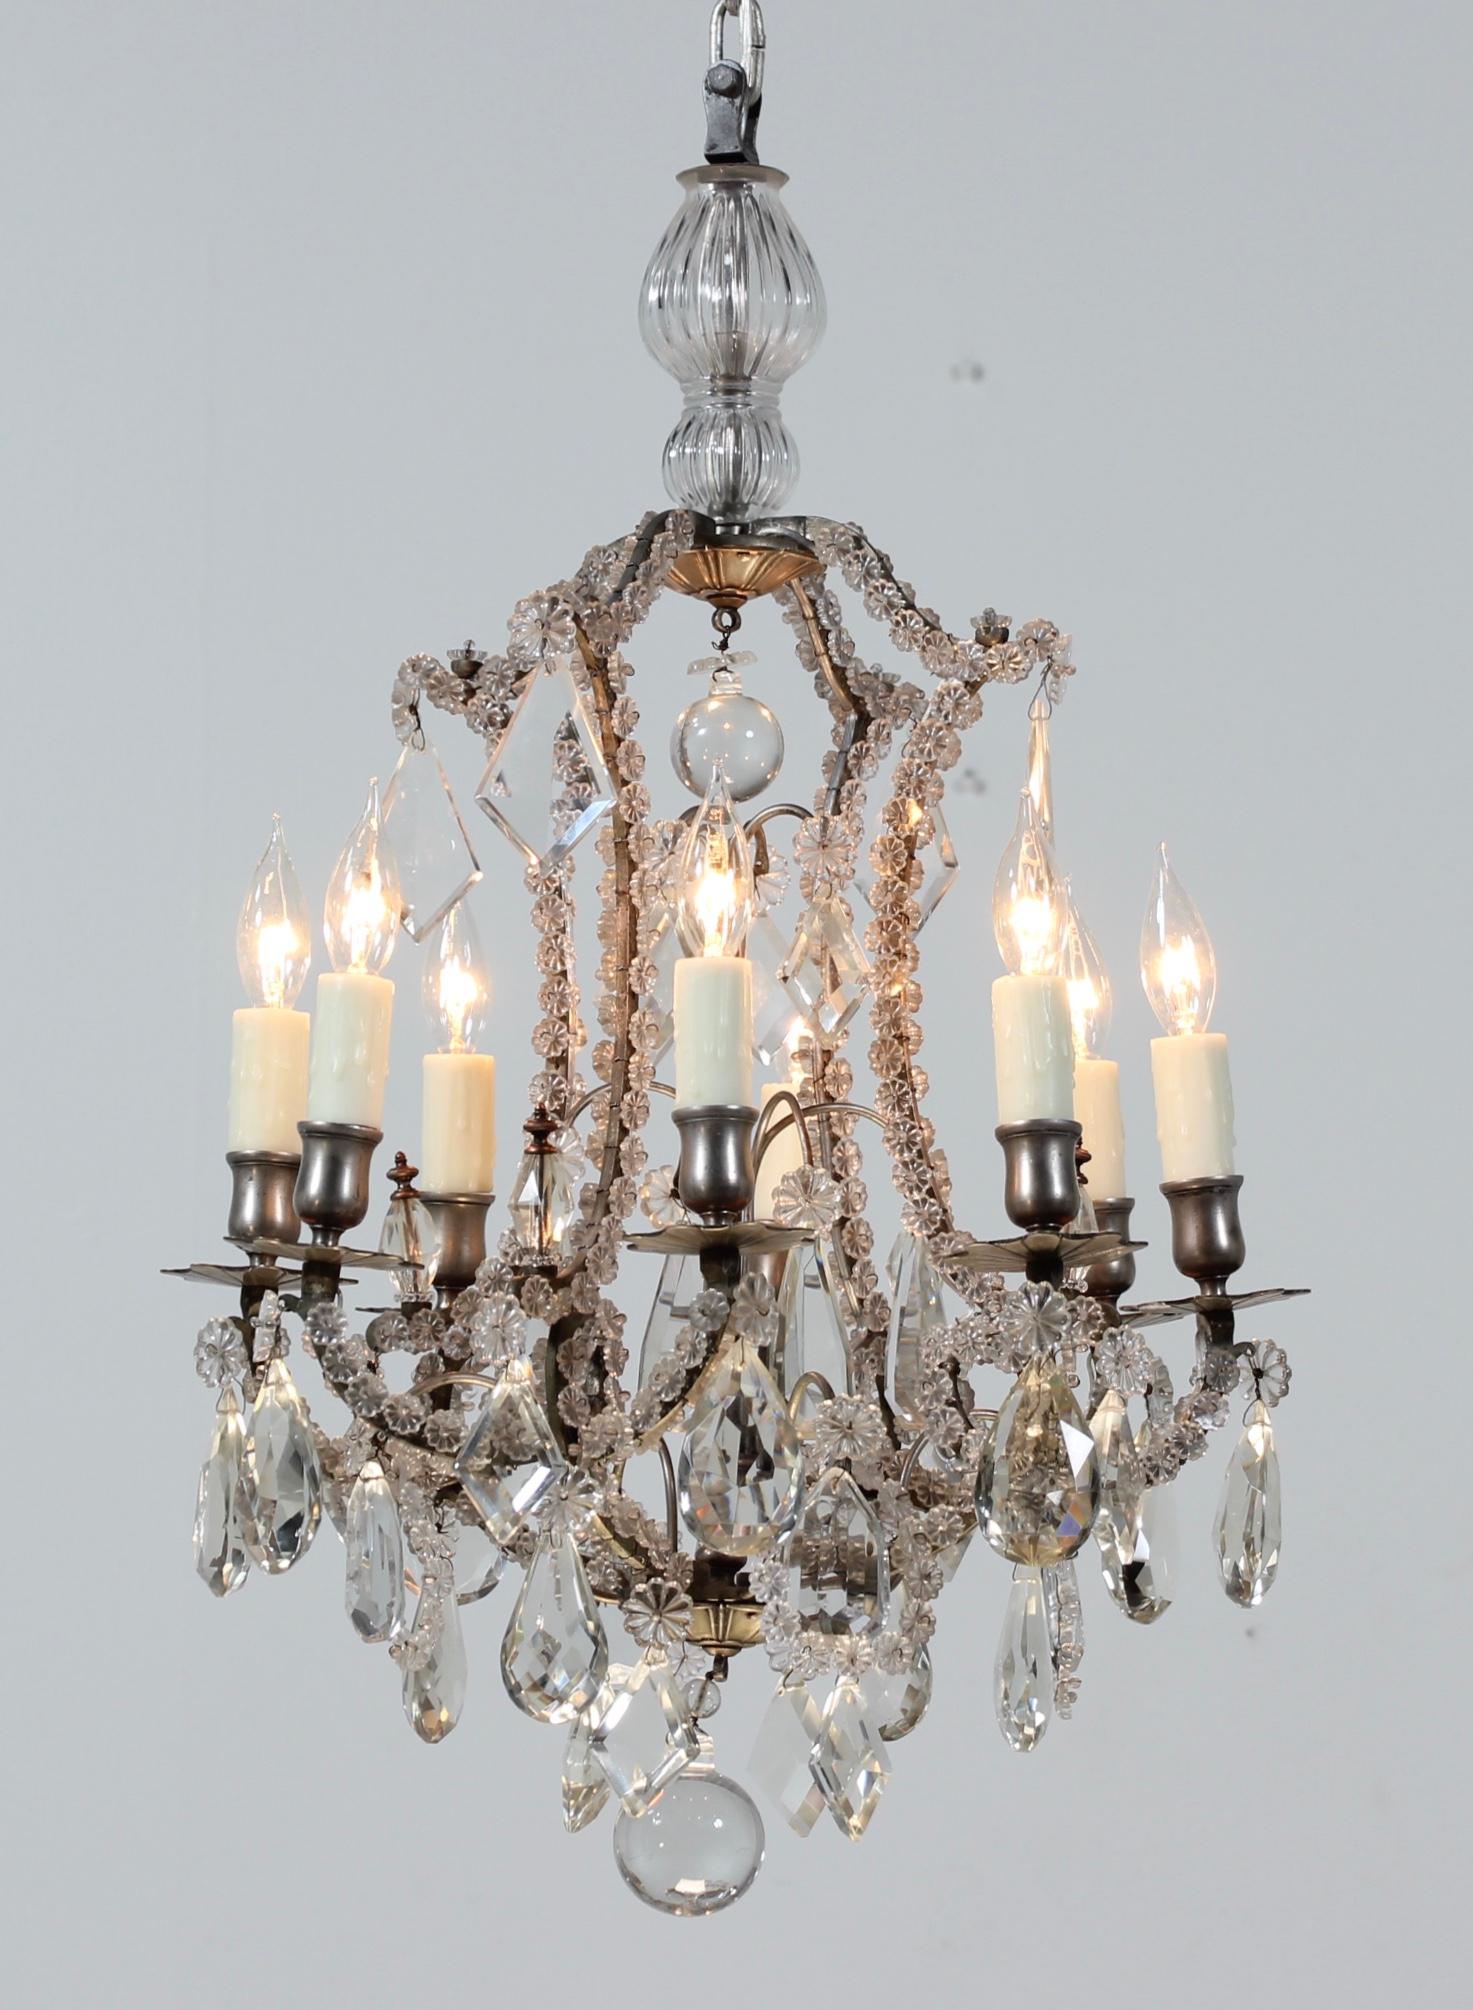 A fine and rare 1920s French crystal chandelier in the manner of Maison Bagues. The chandelier consists of a silver plated scrolled frame which has been delicately beaded with hundreds of crystal rosettes and decorated with faceted crystal prisms in